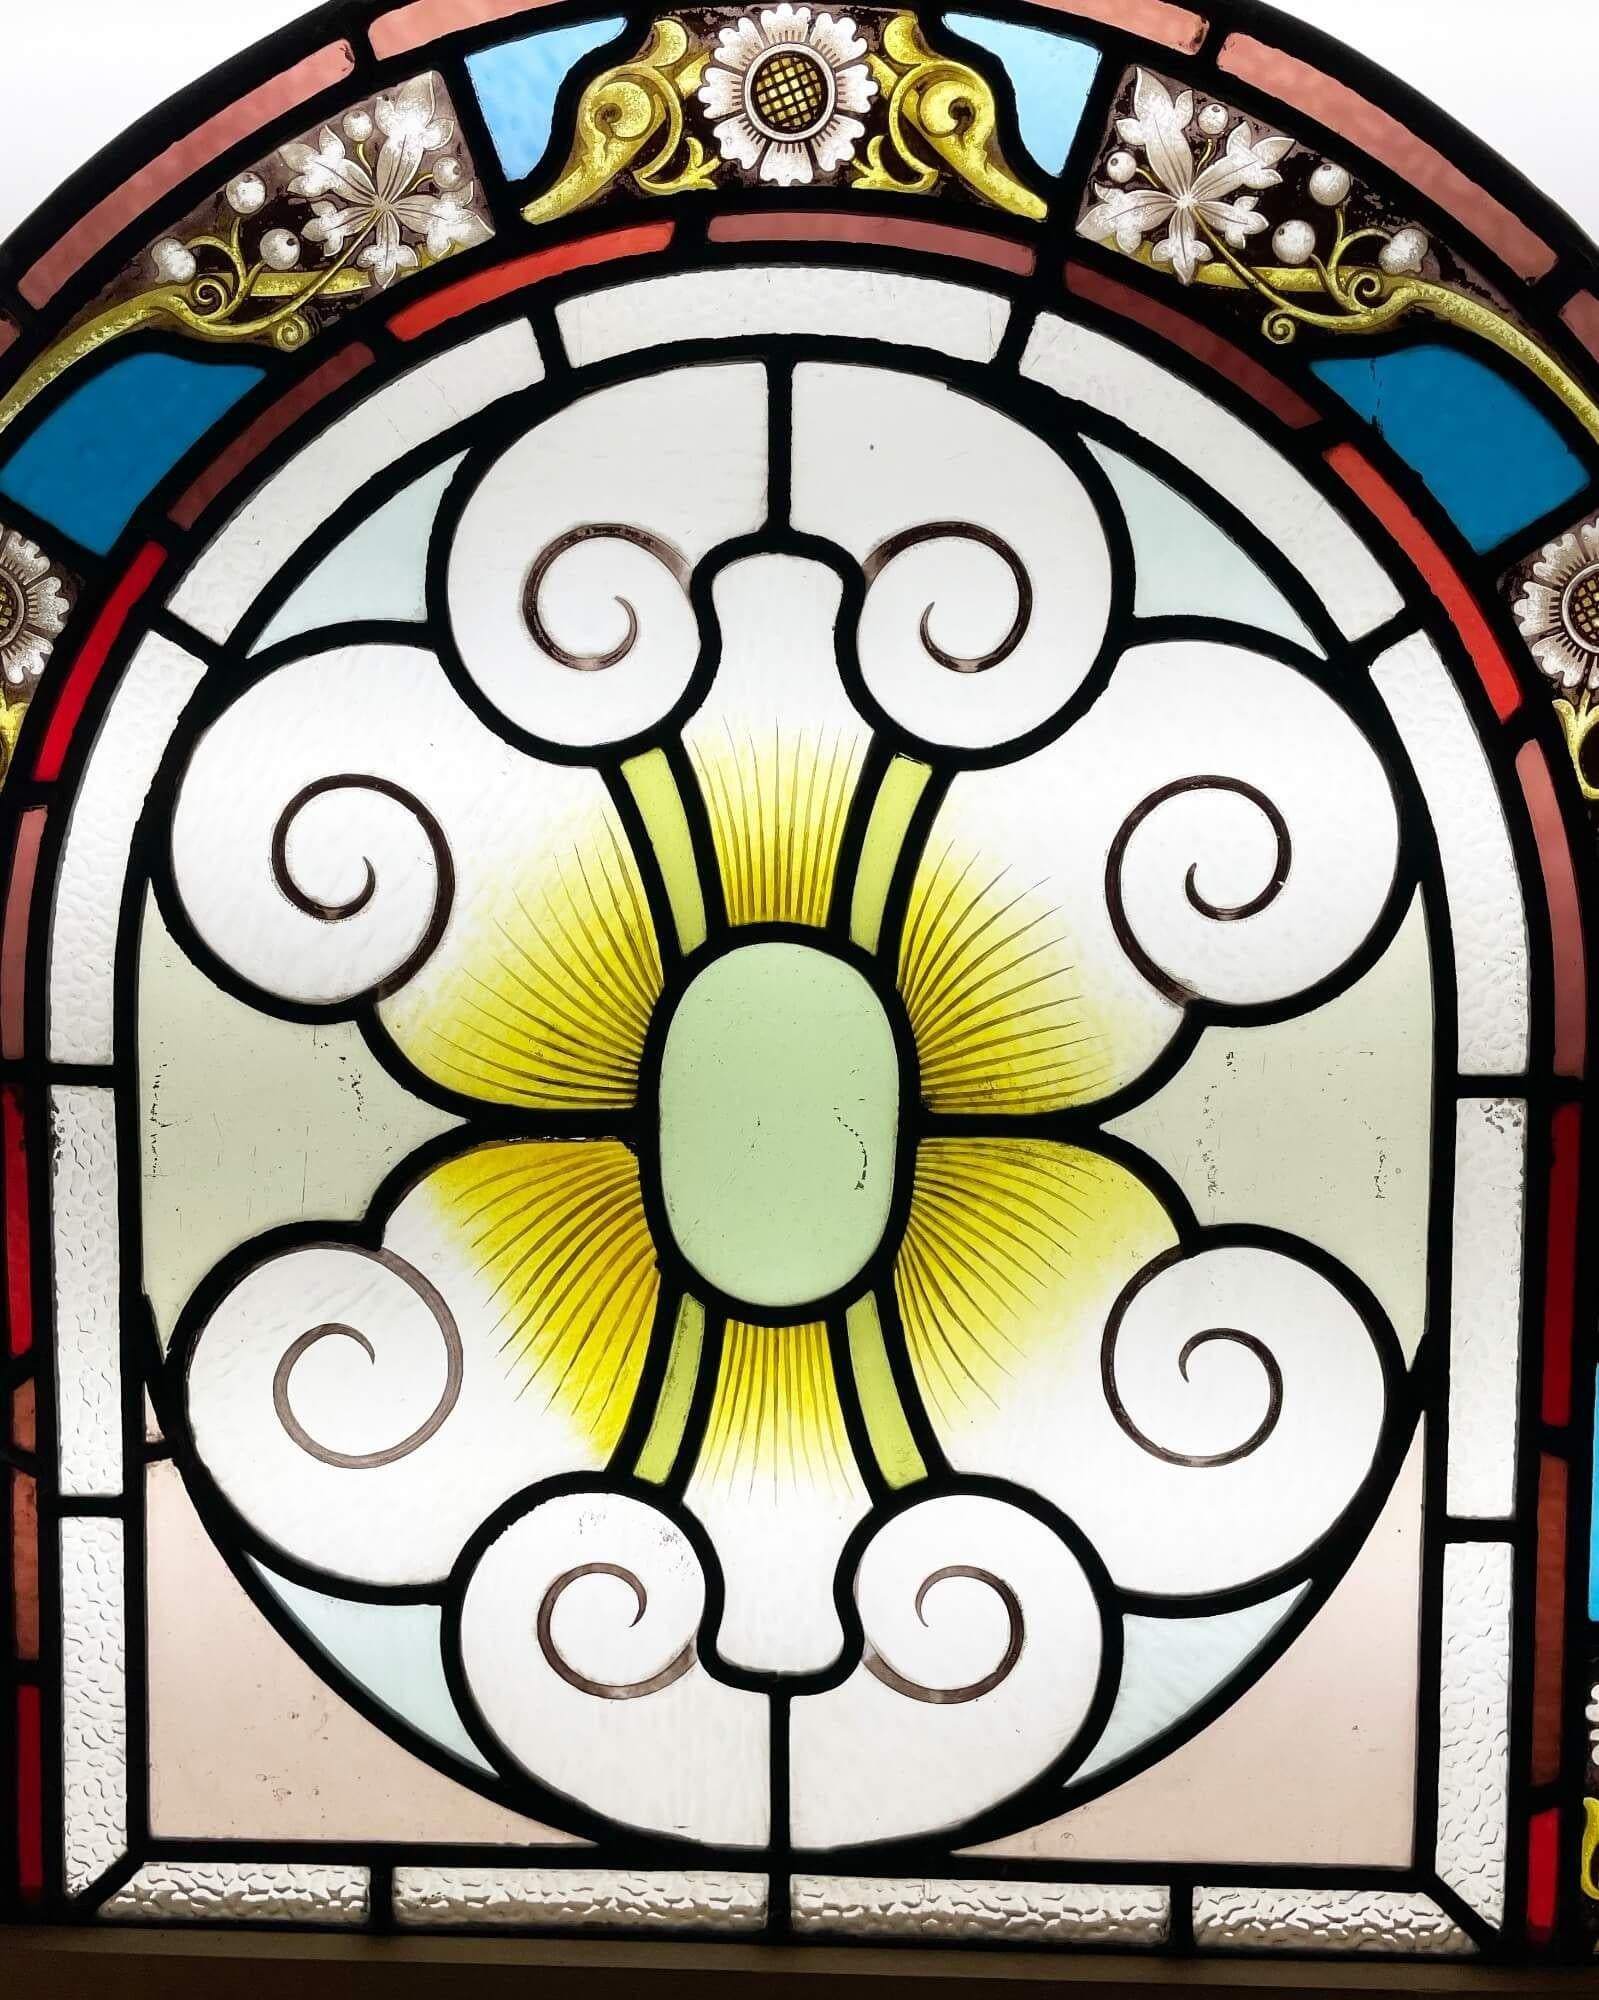 A beautiful antique arched leaded glass window panel dating from the Victorian era circa 1880. This colourful stained glass window features an understated scroll and sunburst design bordered with various stained glass panels in tones of blue, red